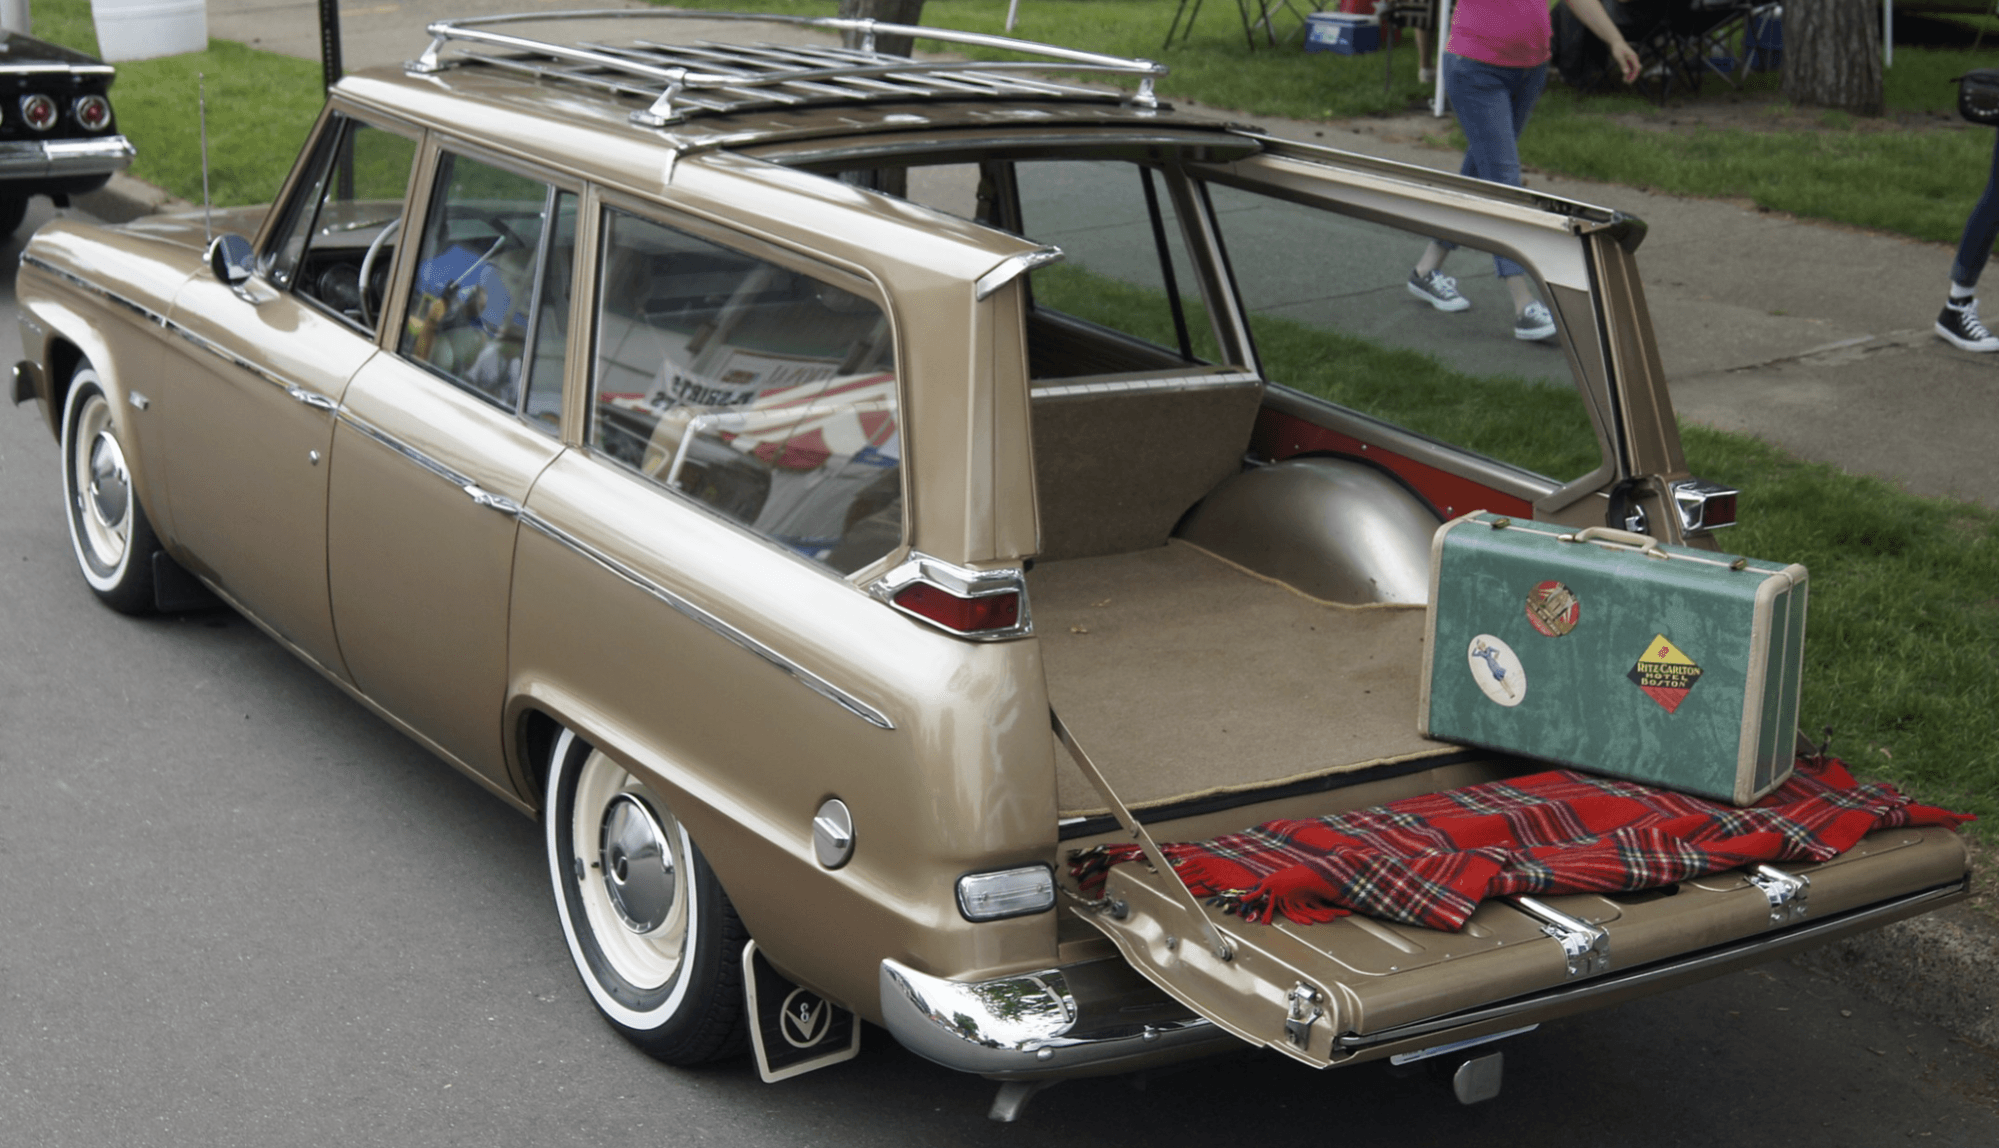 photo of vintage station wagon being packed for a vacation